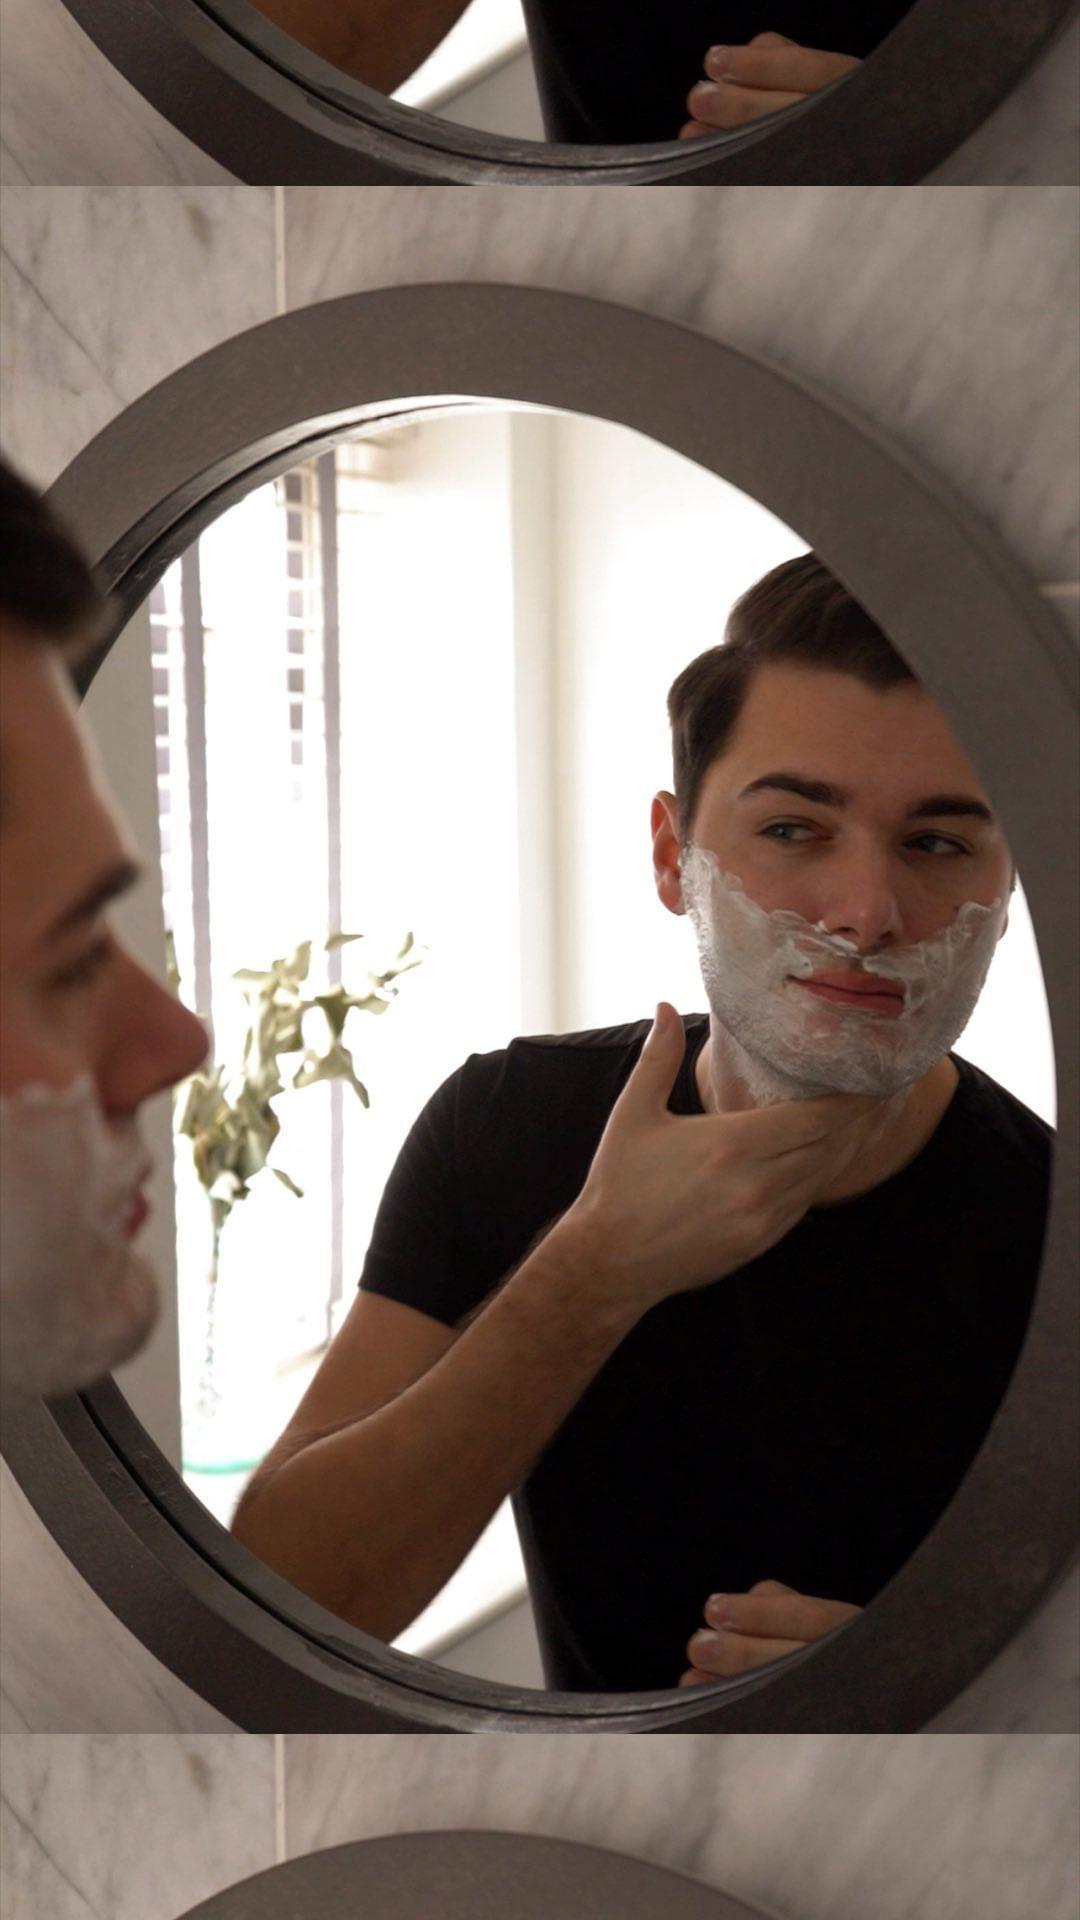 class="content__text"
 #ad Get ready with me for a night out in the city. The @GilletteUK Labs Exfoliating Razor has launched in a new Neon Night Edition. Sharpen up your look with that effortless shave. The built-in exfoliating bar clears the path before the blades for an effortless shave in one stroke. Where will you be heading? #EffortlessFlow #NeonNightOut 
 